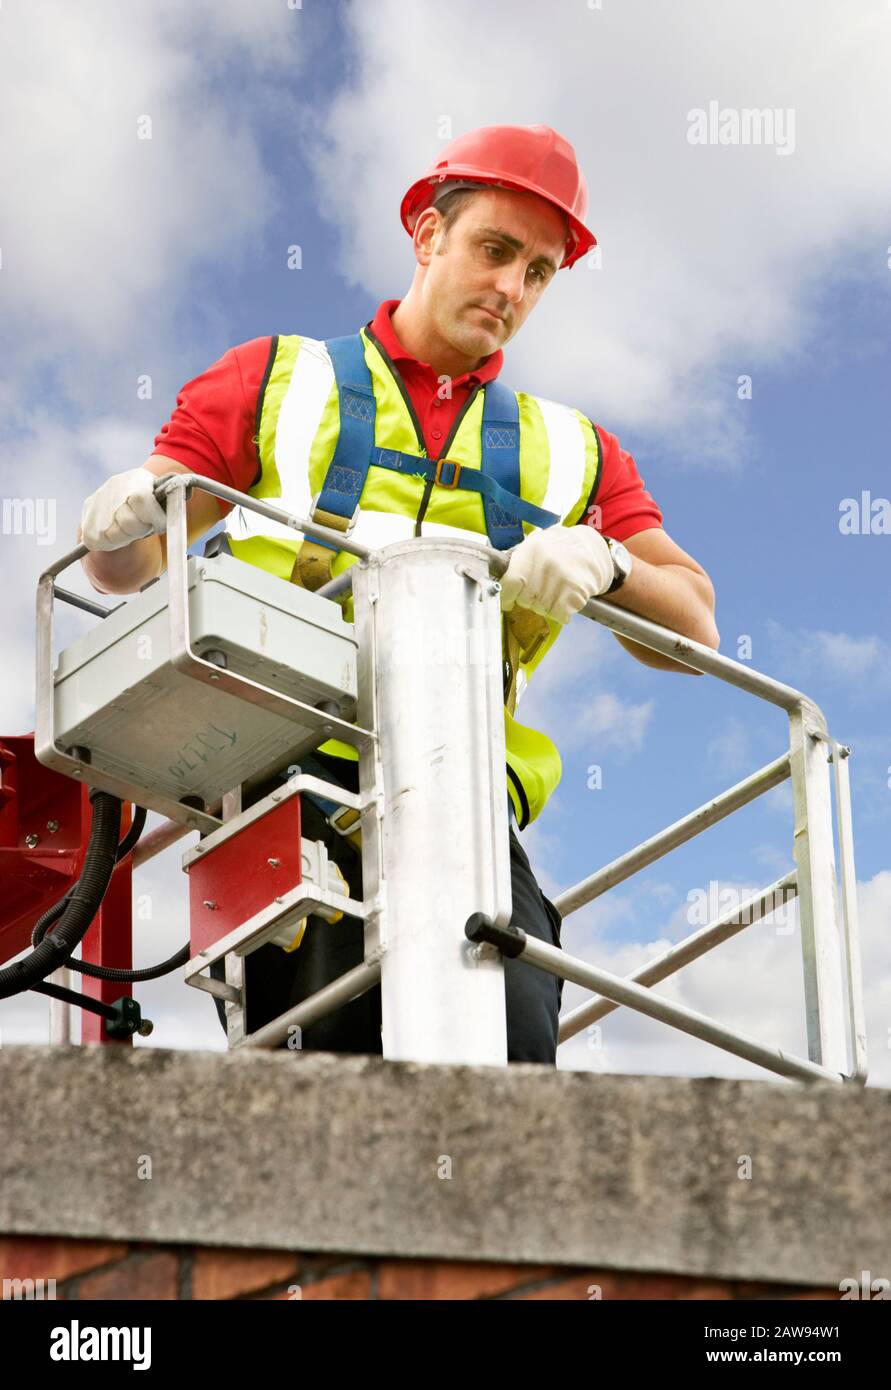 Workman in a cherry picker wearing safety clothing and inspecting a roof Stock Photo